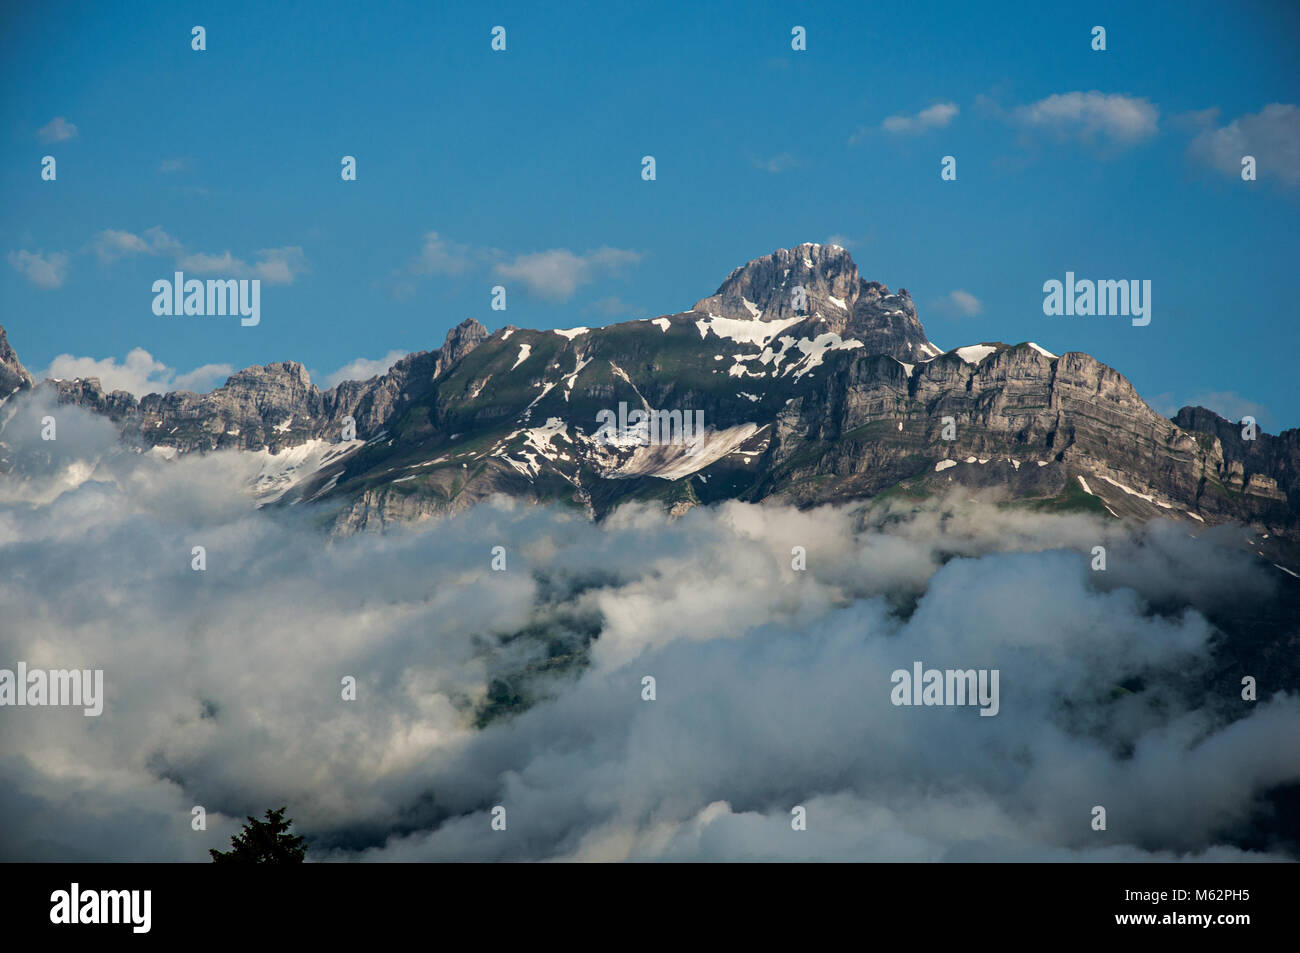 Snowy peaks and alpine mountains panorama with blue sky and clouds in Saint-Gervais-Les-Bains/Le Fayet. Near the Mont Blanc in the French Alps. Stock Photo